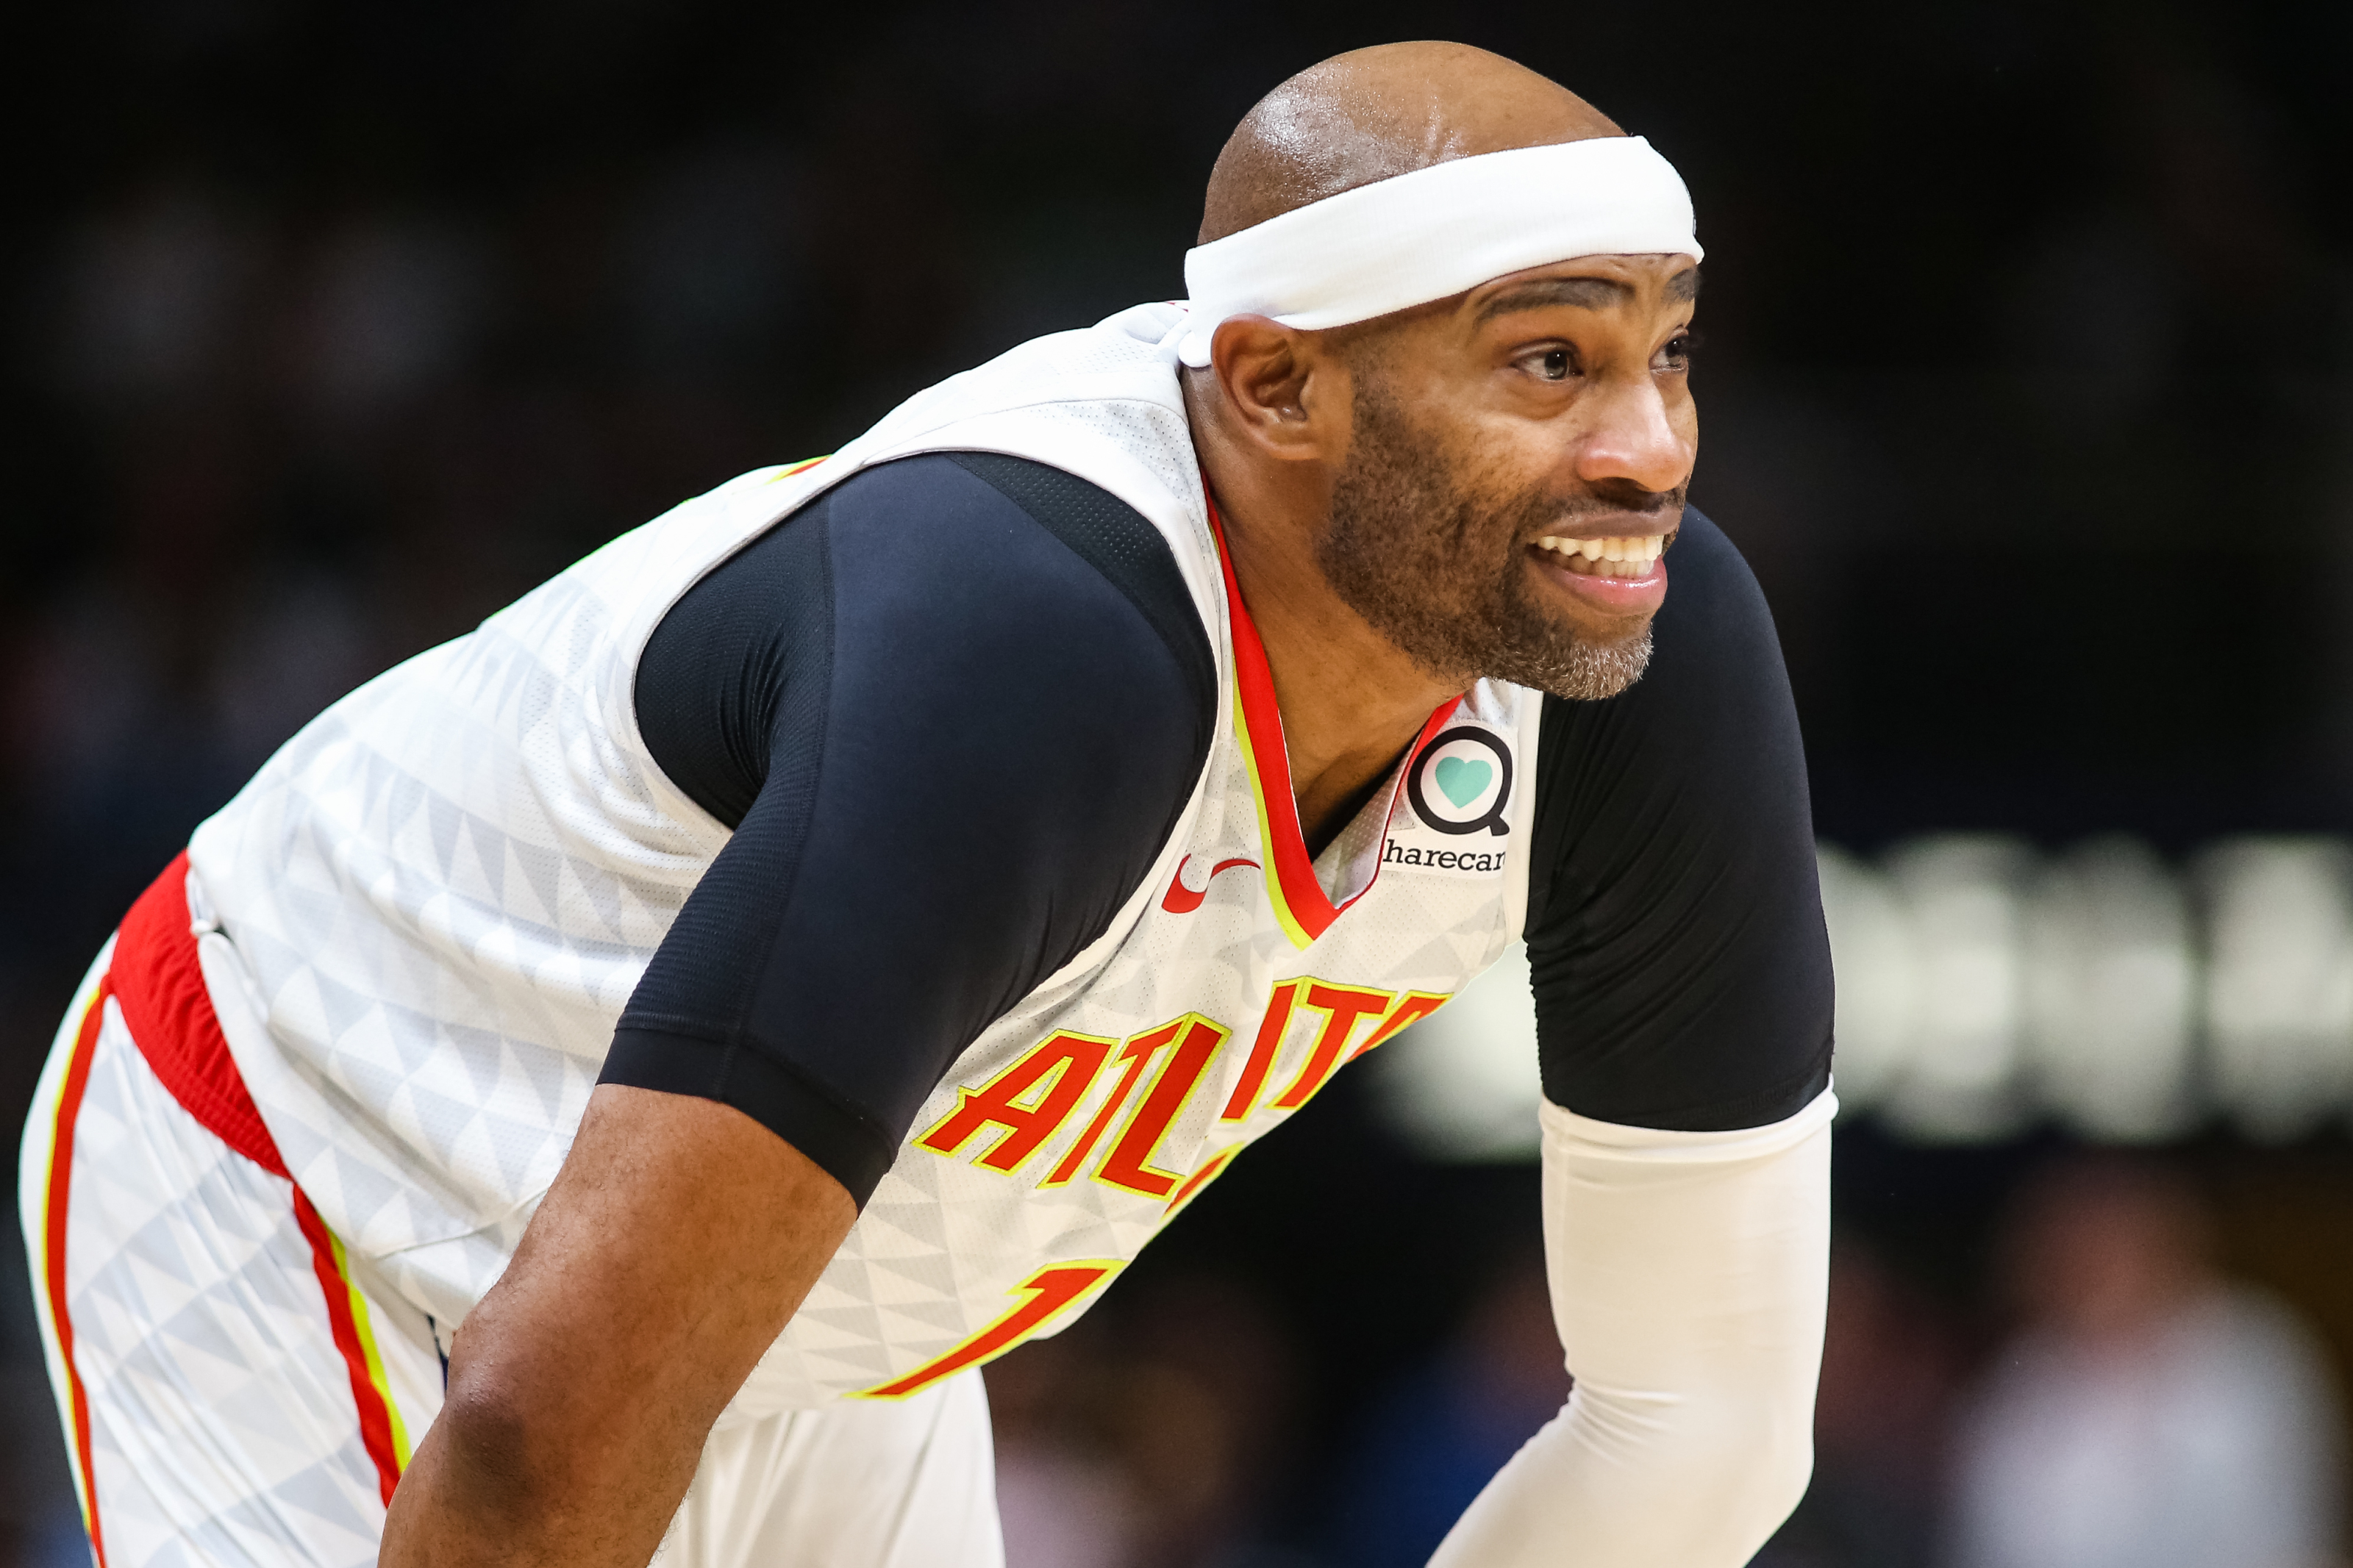 Brooklyn Nets should bring back Vince Carter for 1 last run - Page 3